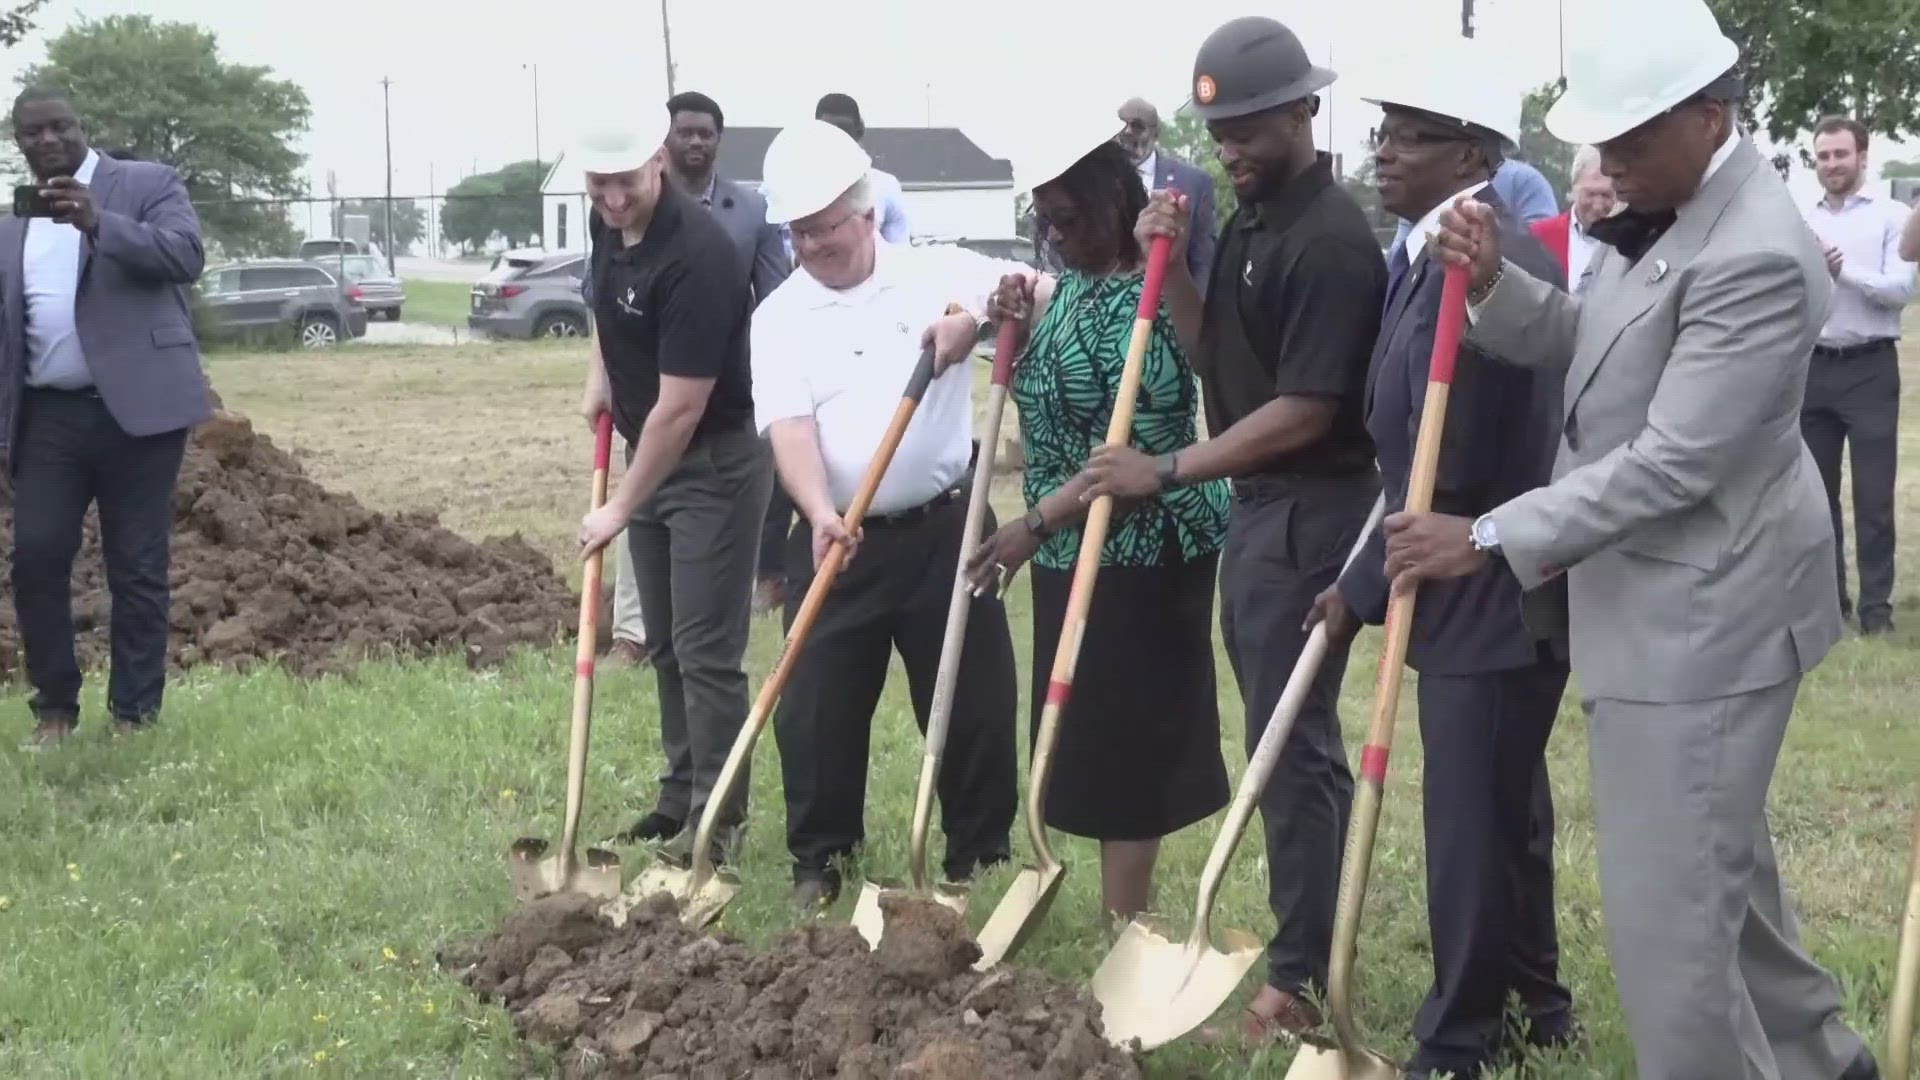 Work has started on a new project bringing hundreds of new housing units to Southern Dallas. The force behind it is a former SMU football player.